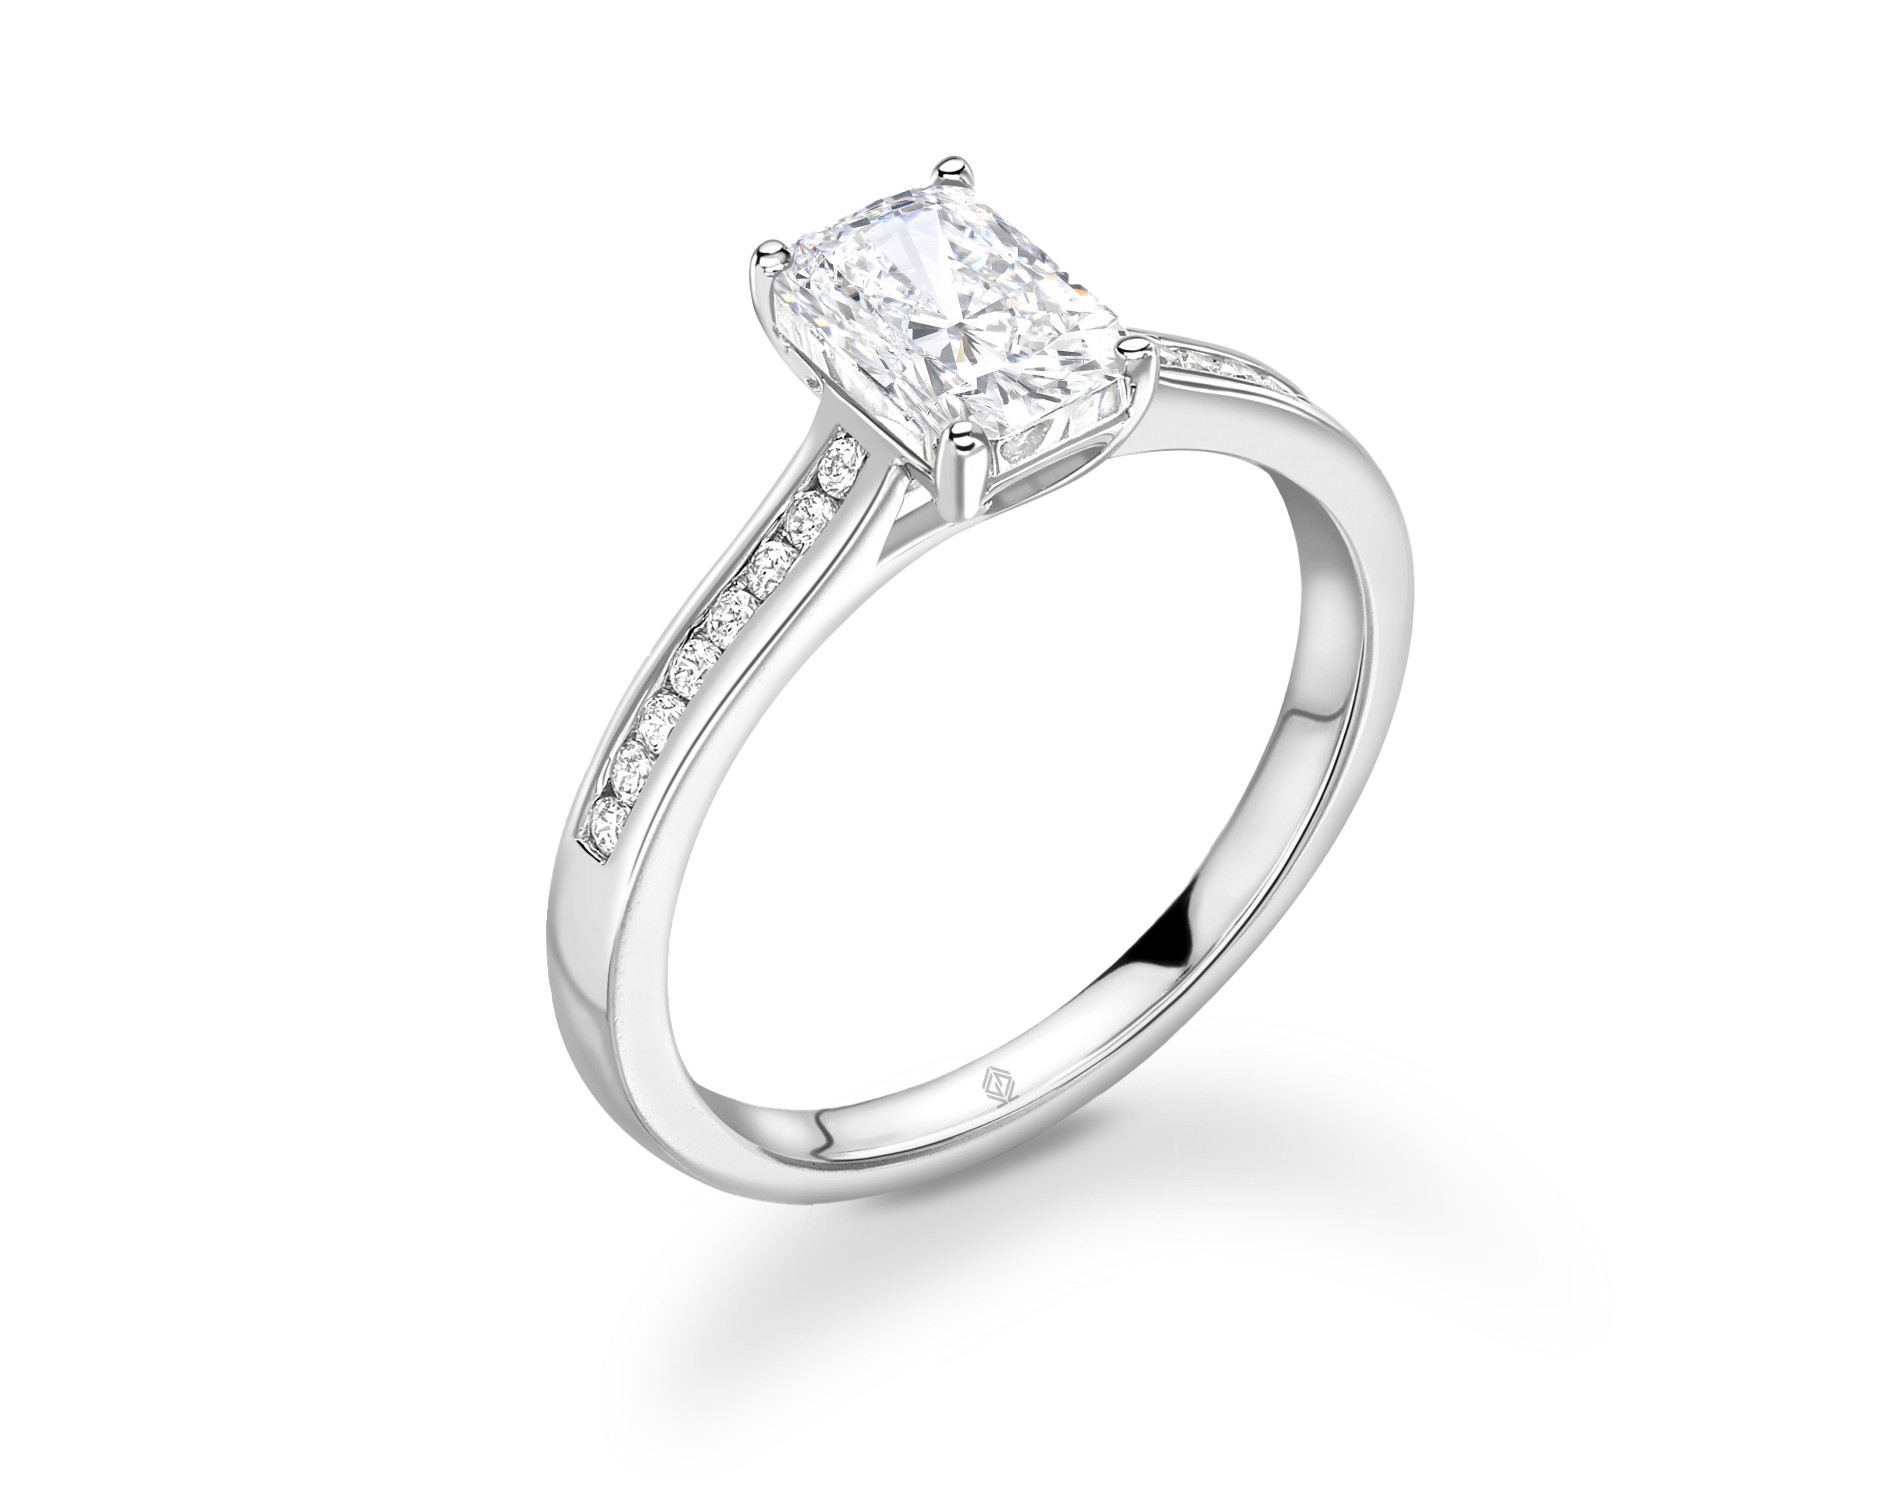 18K WHITE GOLD 4 PRONGS EMERALD CUT DIAMOND ENGAGEMENT RING WITH SIDE STONES CHANNEL SET